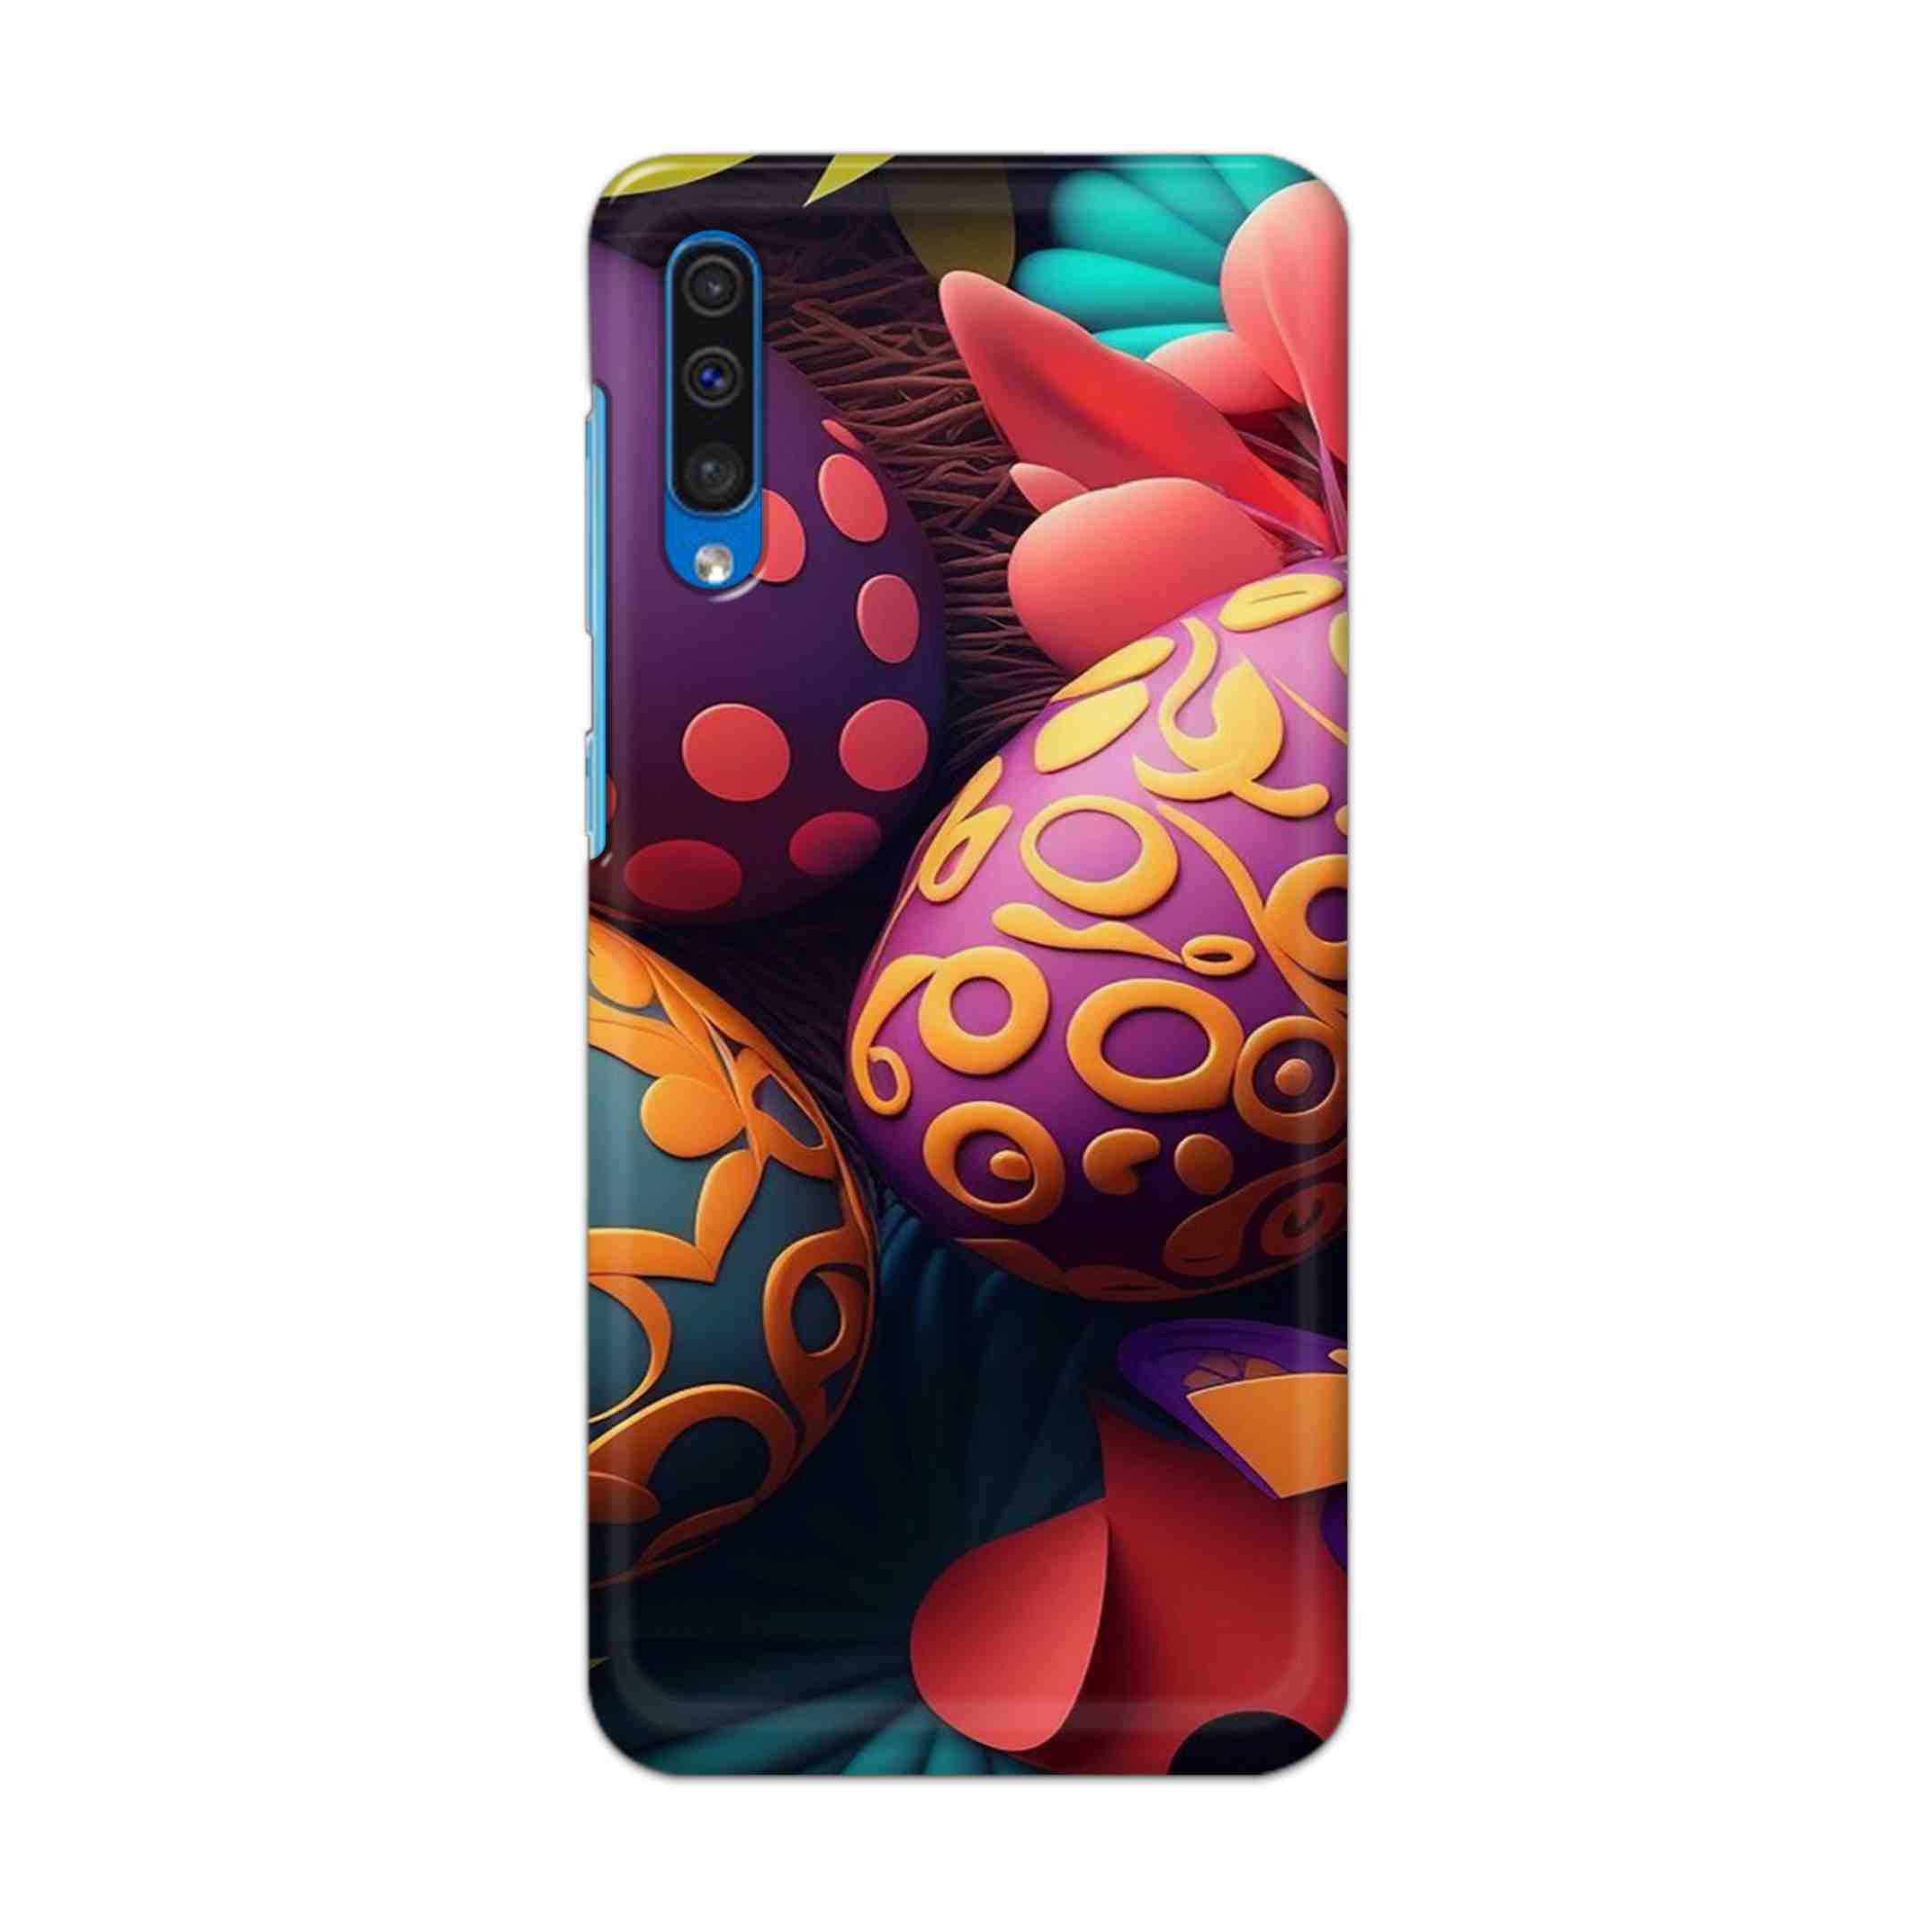 Buy Easter Egg Hard Back Mobile Phone Case Cover For Samsung Galaxy A50 / A50s / A30s Online